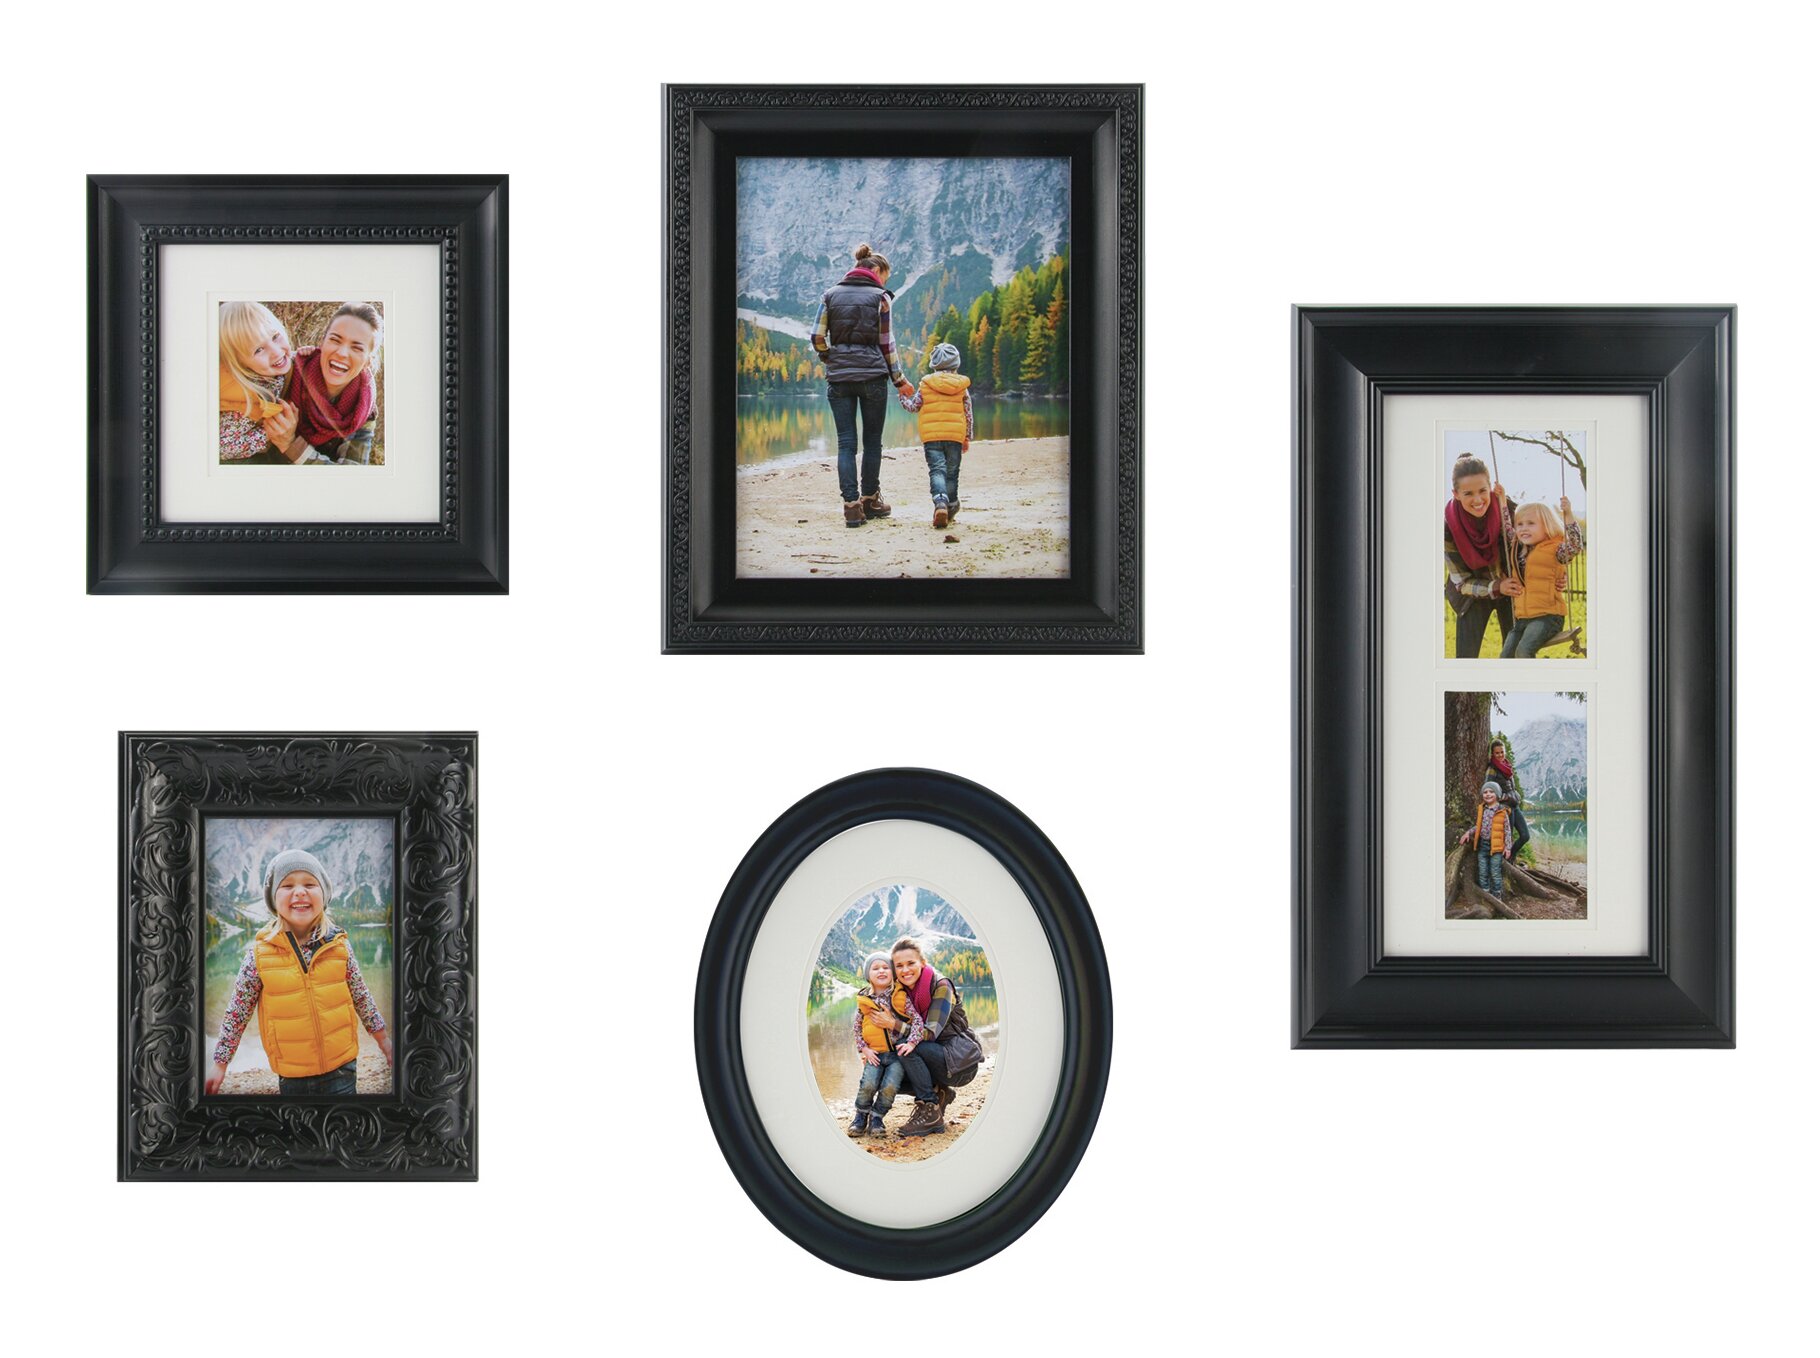 JOY MEMORY 6 Pack 5x7 Picture Frames with 4x6 Mat Vertical or Horizontal Display for Wall or Tabletop Glass Fronts Photo Frame